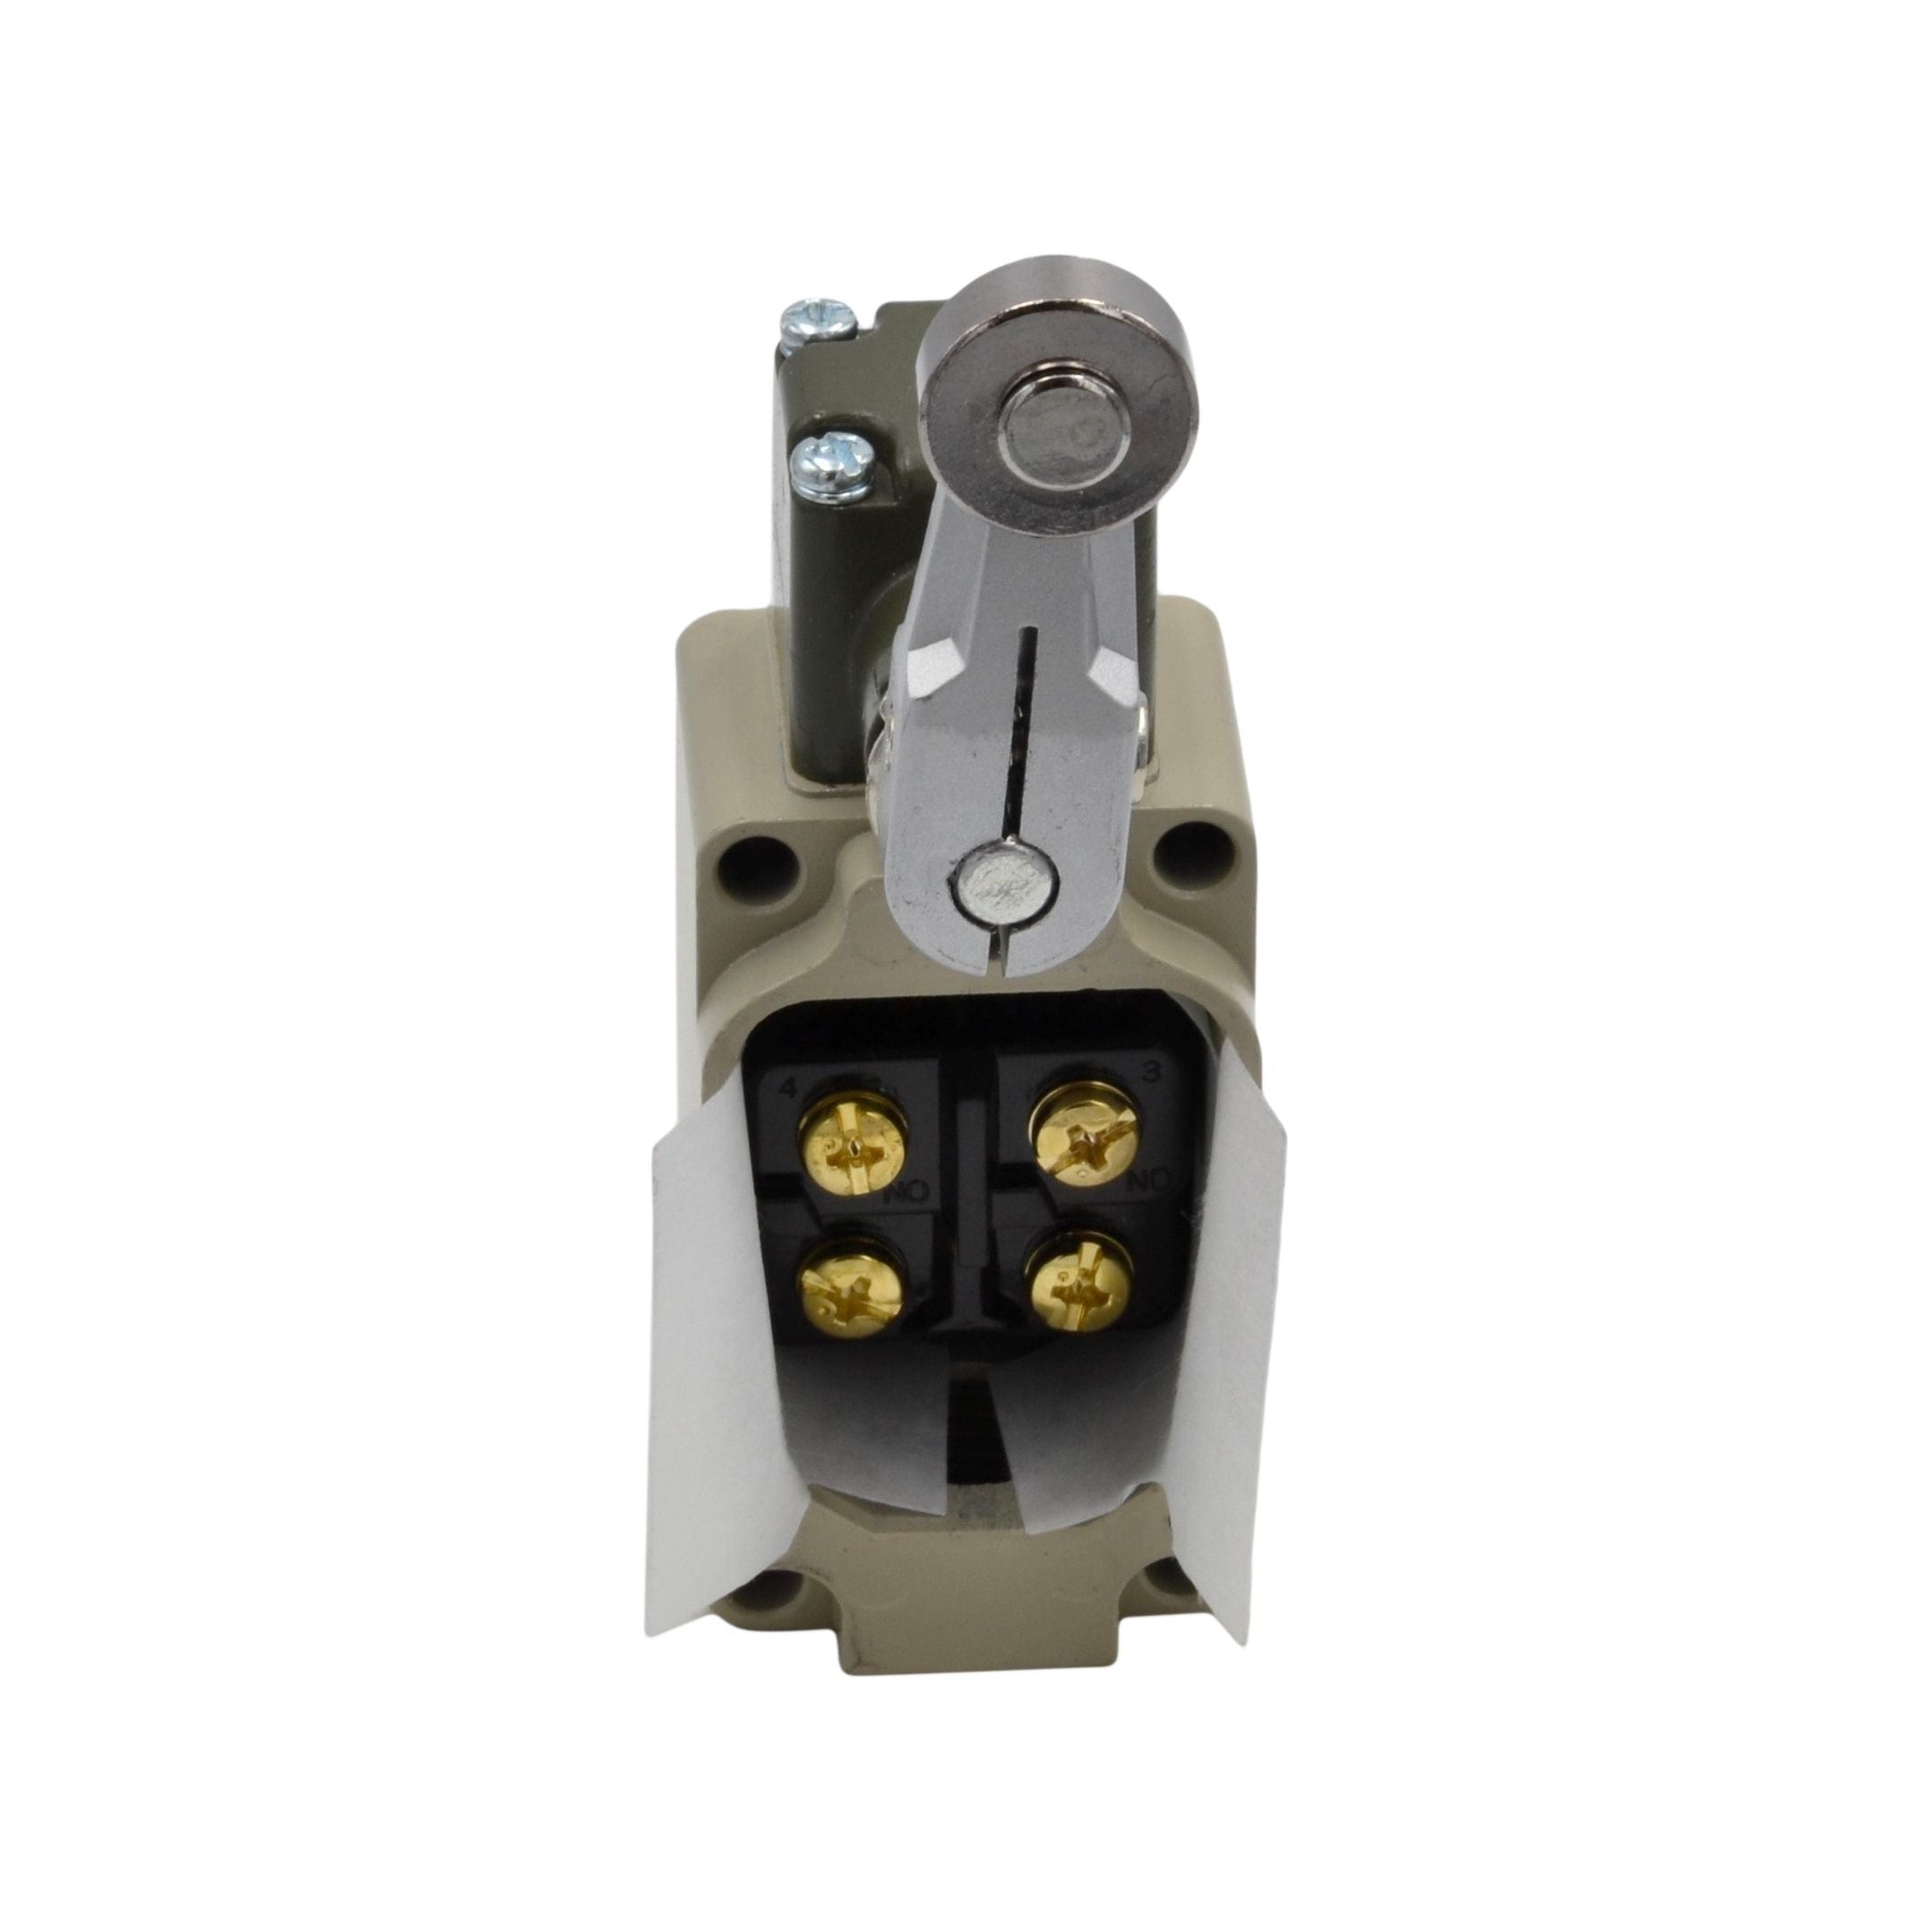 WLCA2-2 Micro Limit Switch with Adjustable Lever Roller Arm